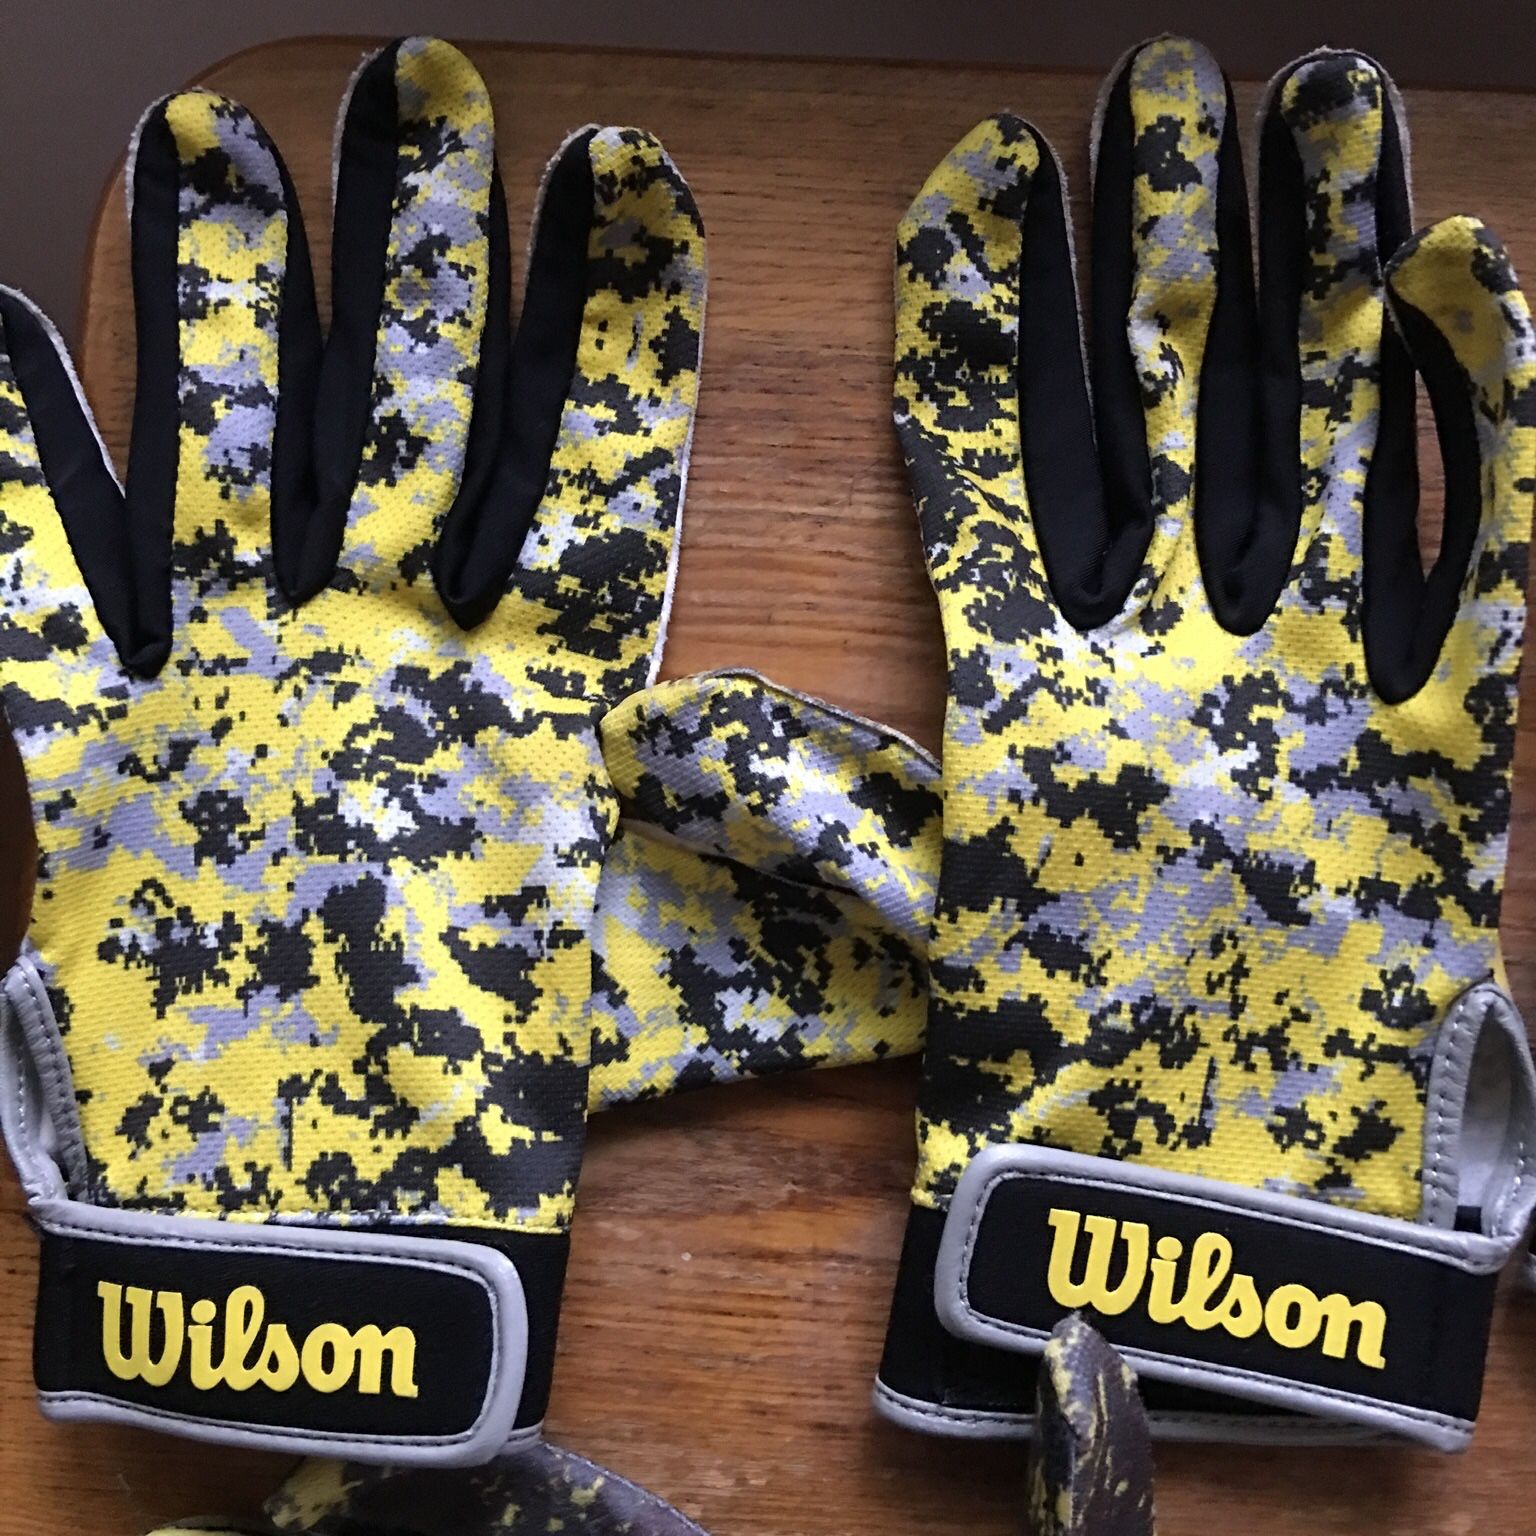 WILSON STICKY ATHLETIC GLOVES $20 Ea Pair